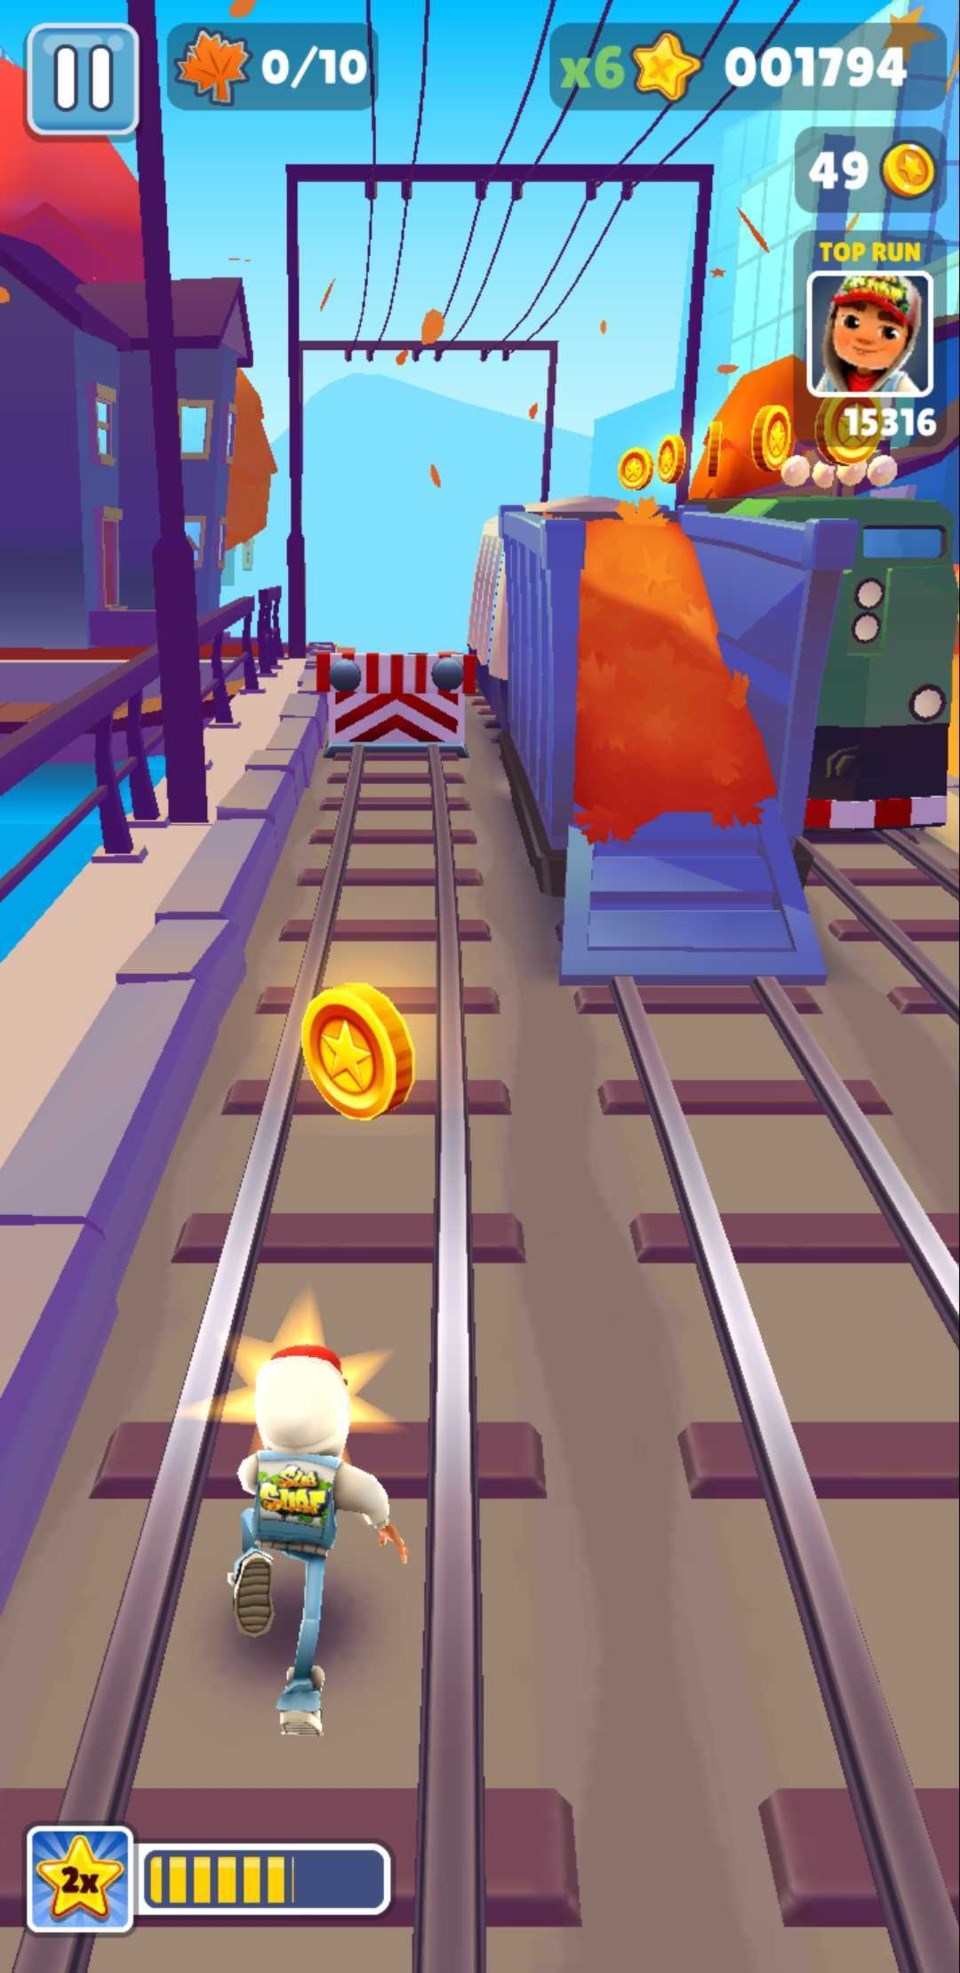 Subway Surfers: Vancouver - Play 2 Plant - Gameplay 